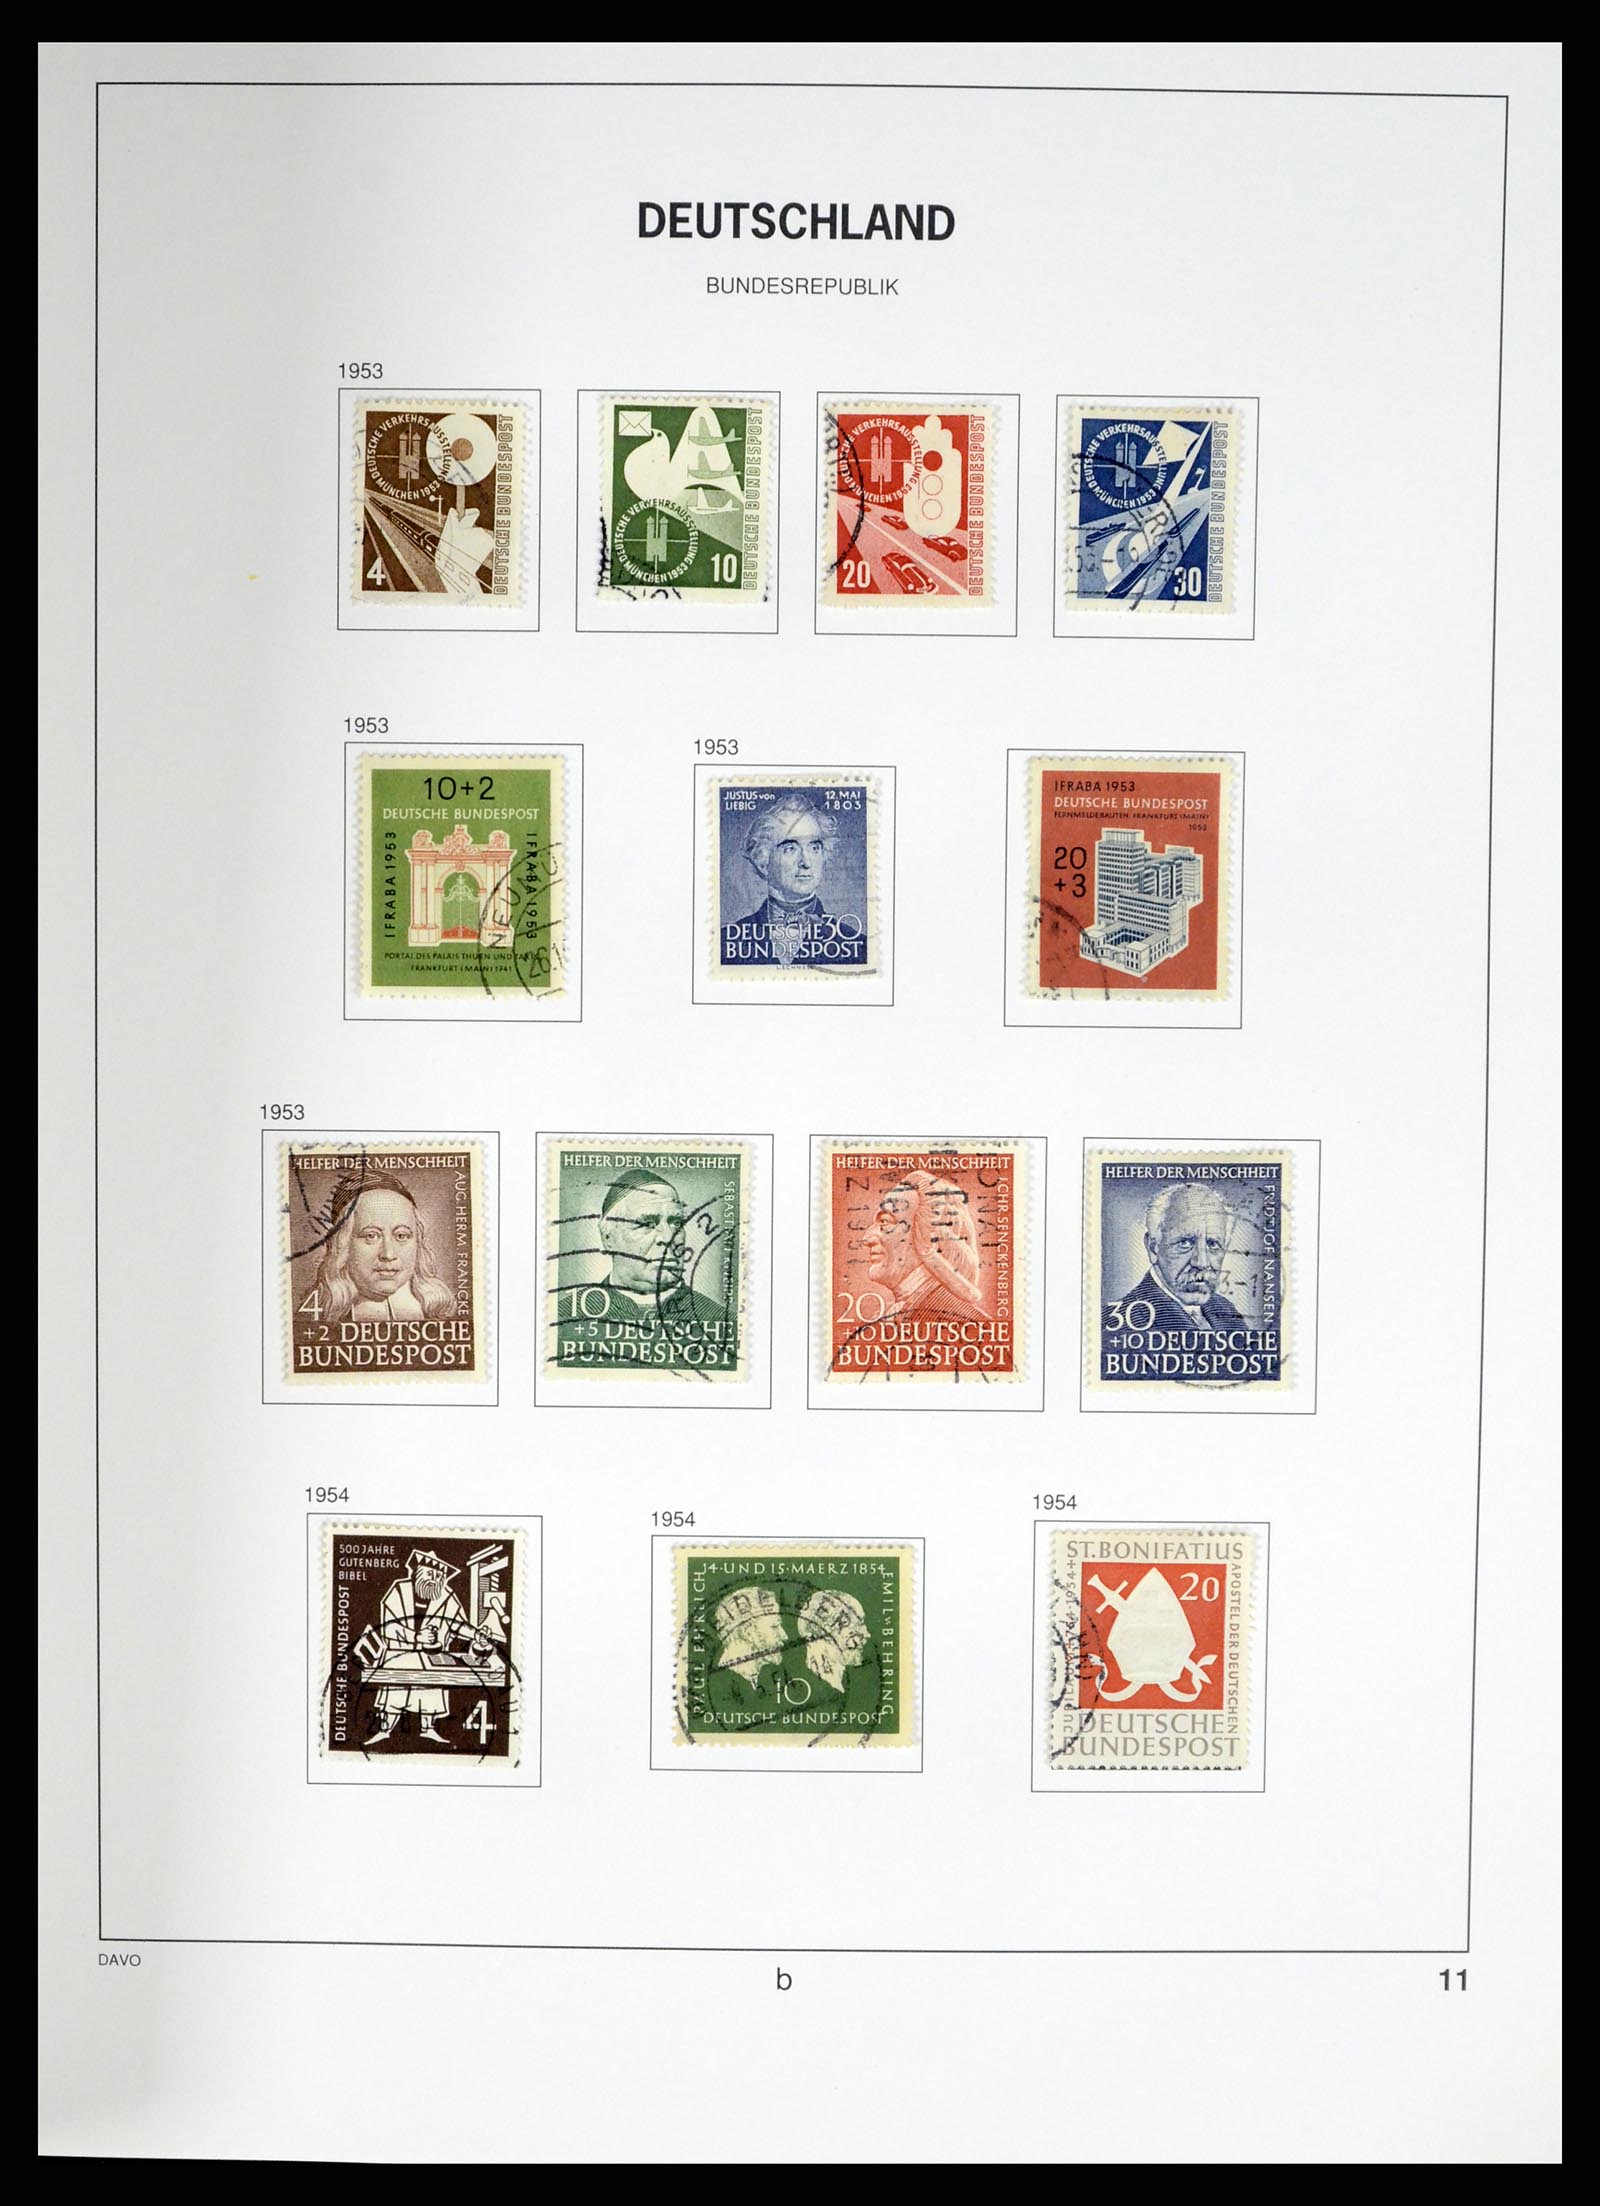 37330 033 - Stamp collection 37330 Germany 1946-1969.